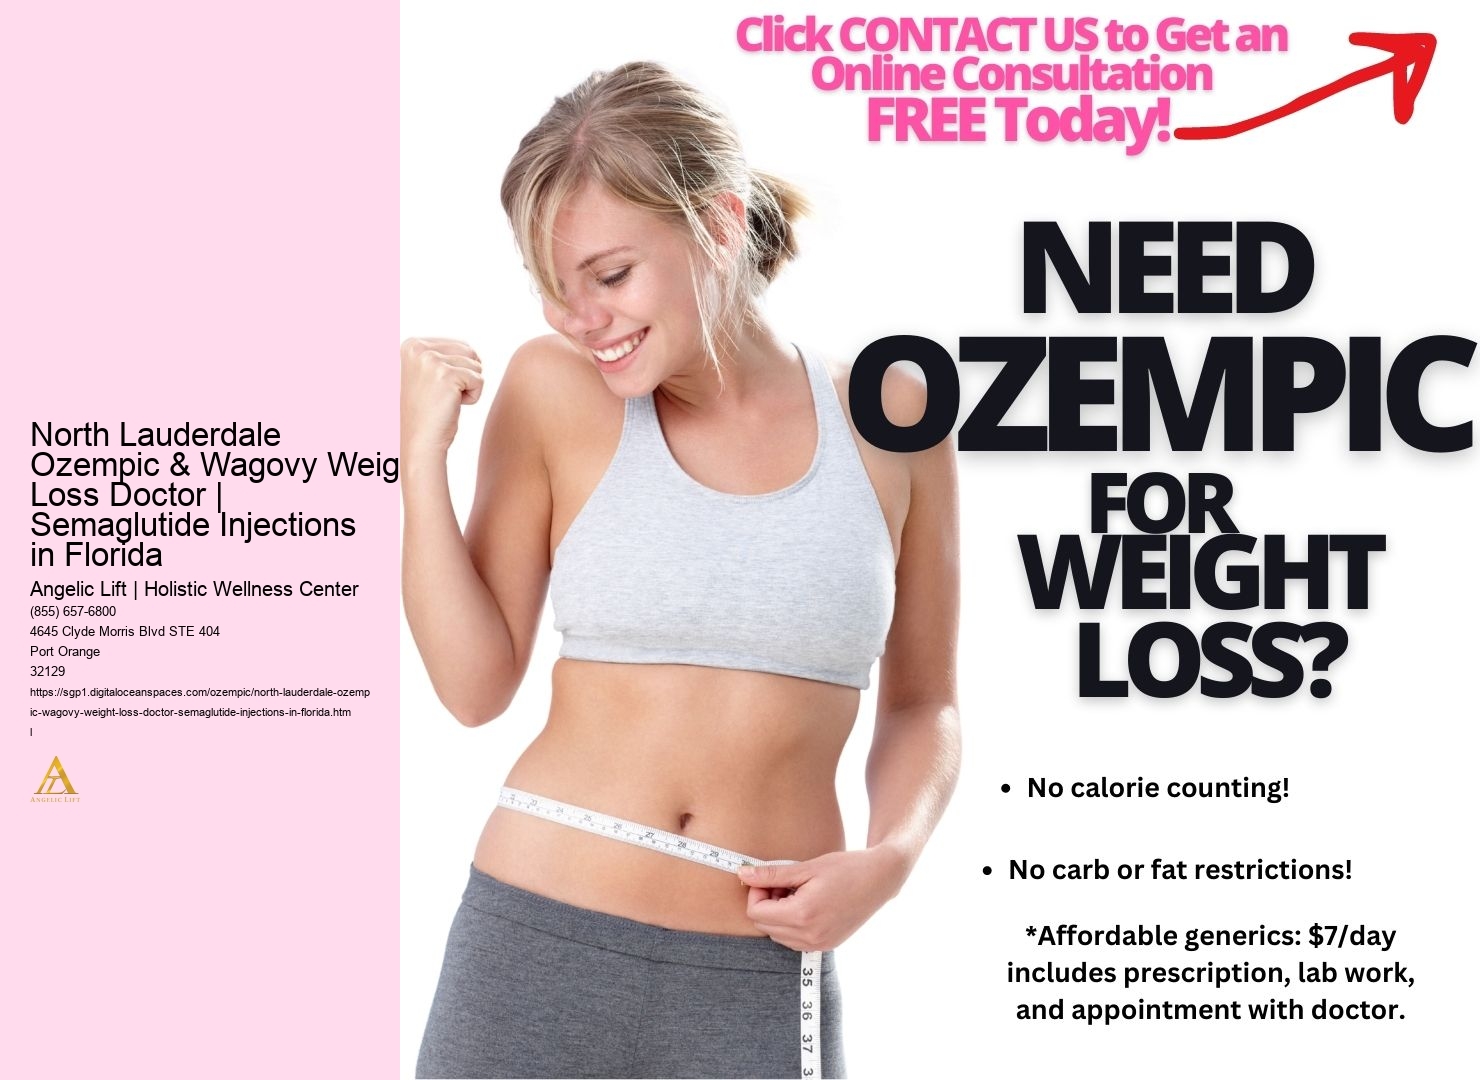 North Lauderdale Ozempic & Wagovy Weight Loss Doctor | Semaglutide Injections in Florida